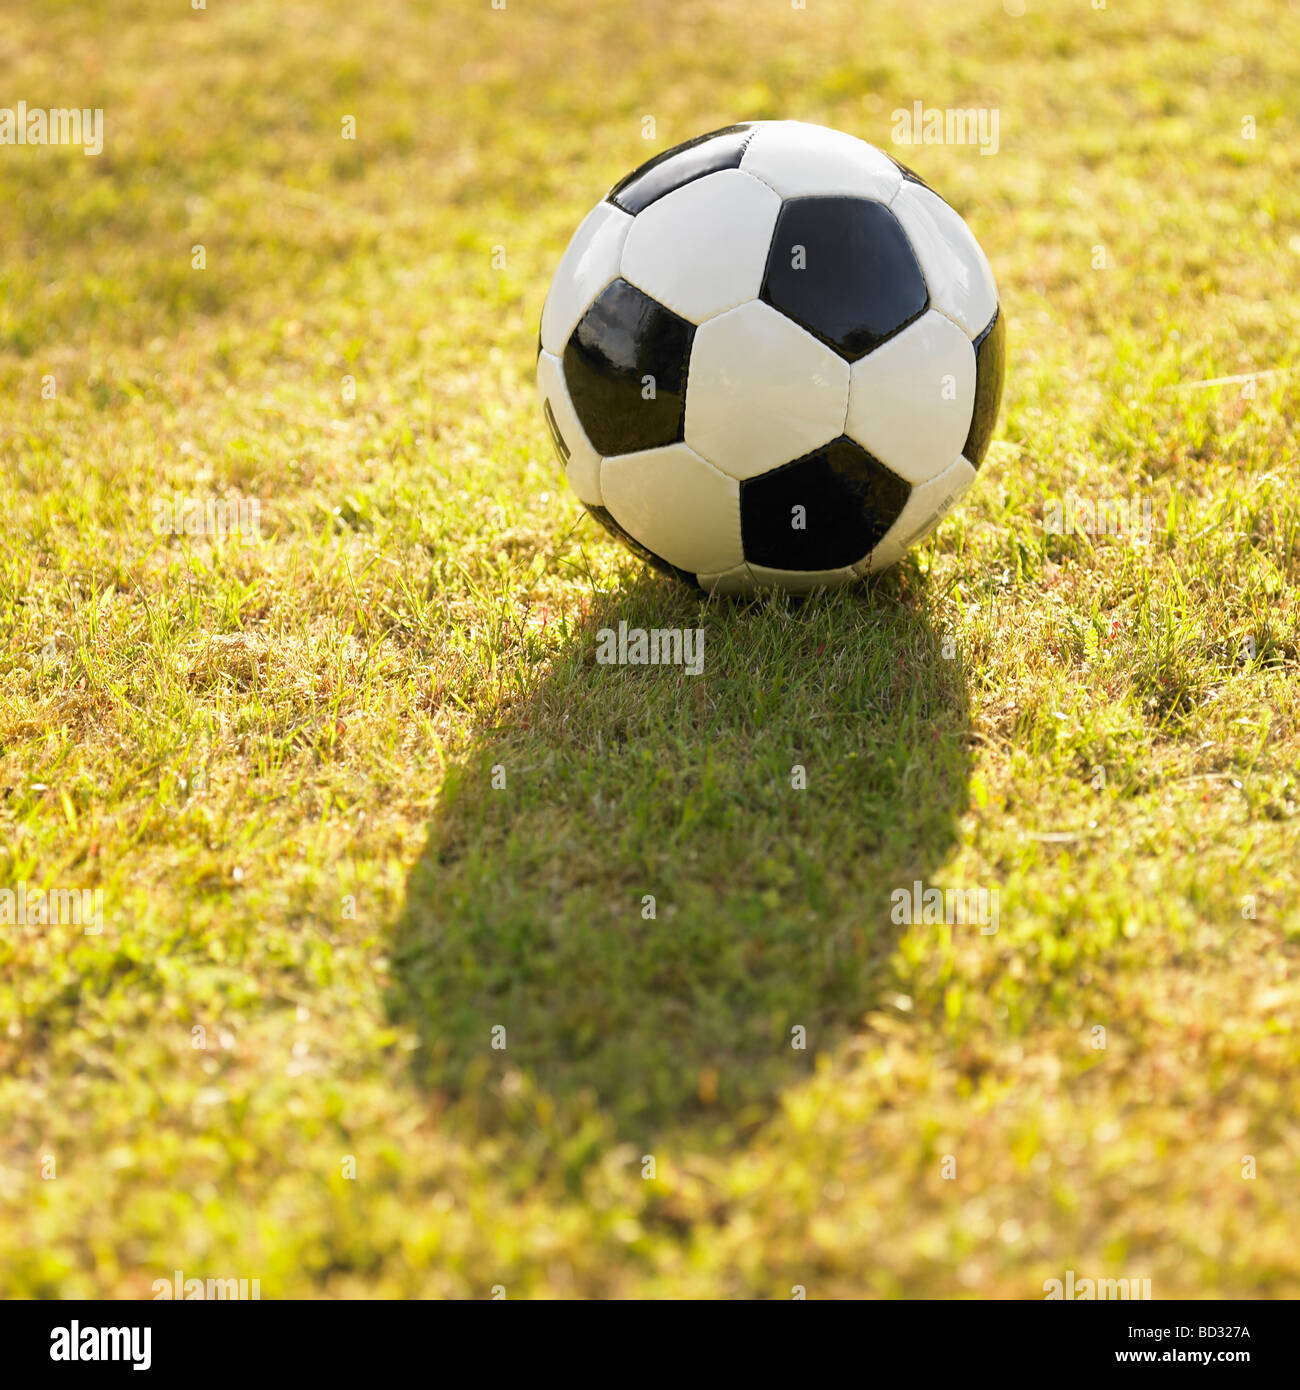 Black and white generic leather football / soccer ball on grass, back lit in the sun. Stock Photo